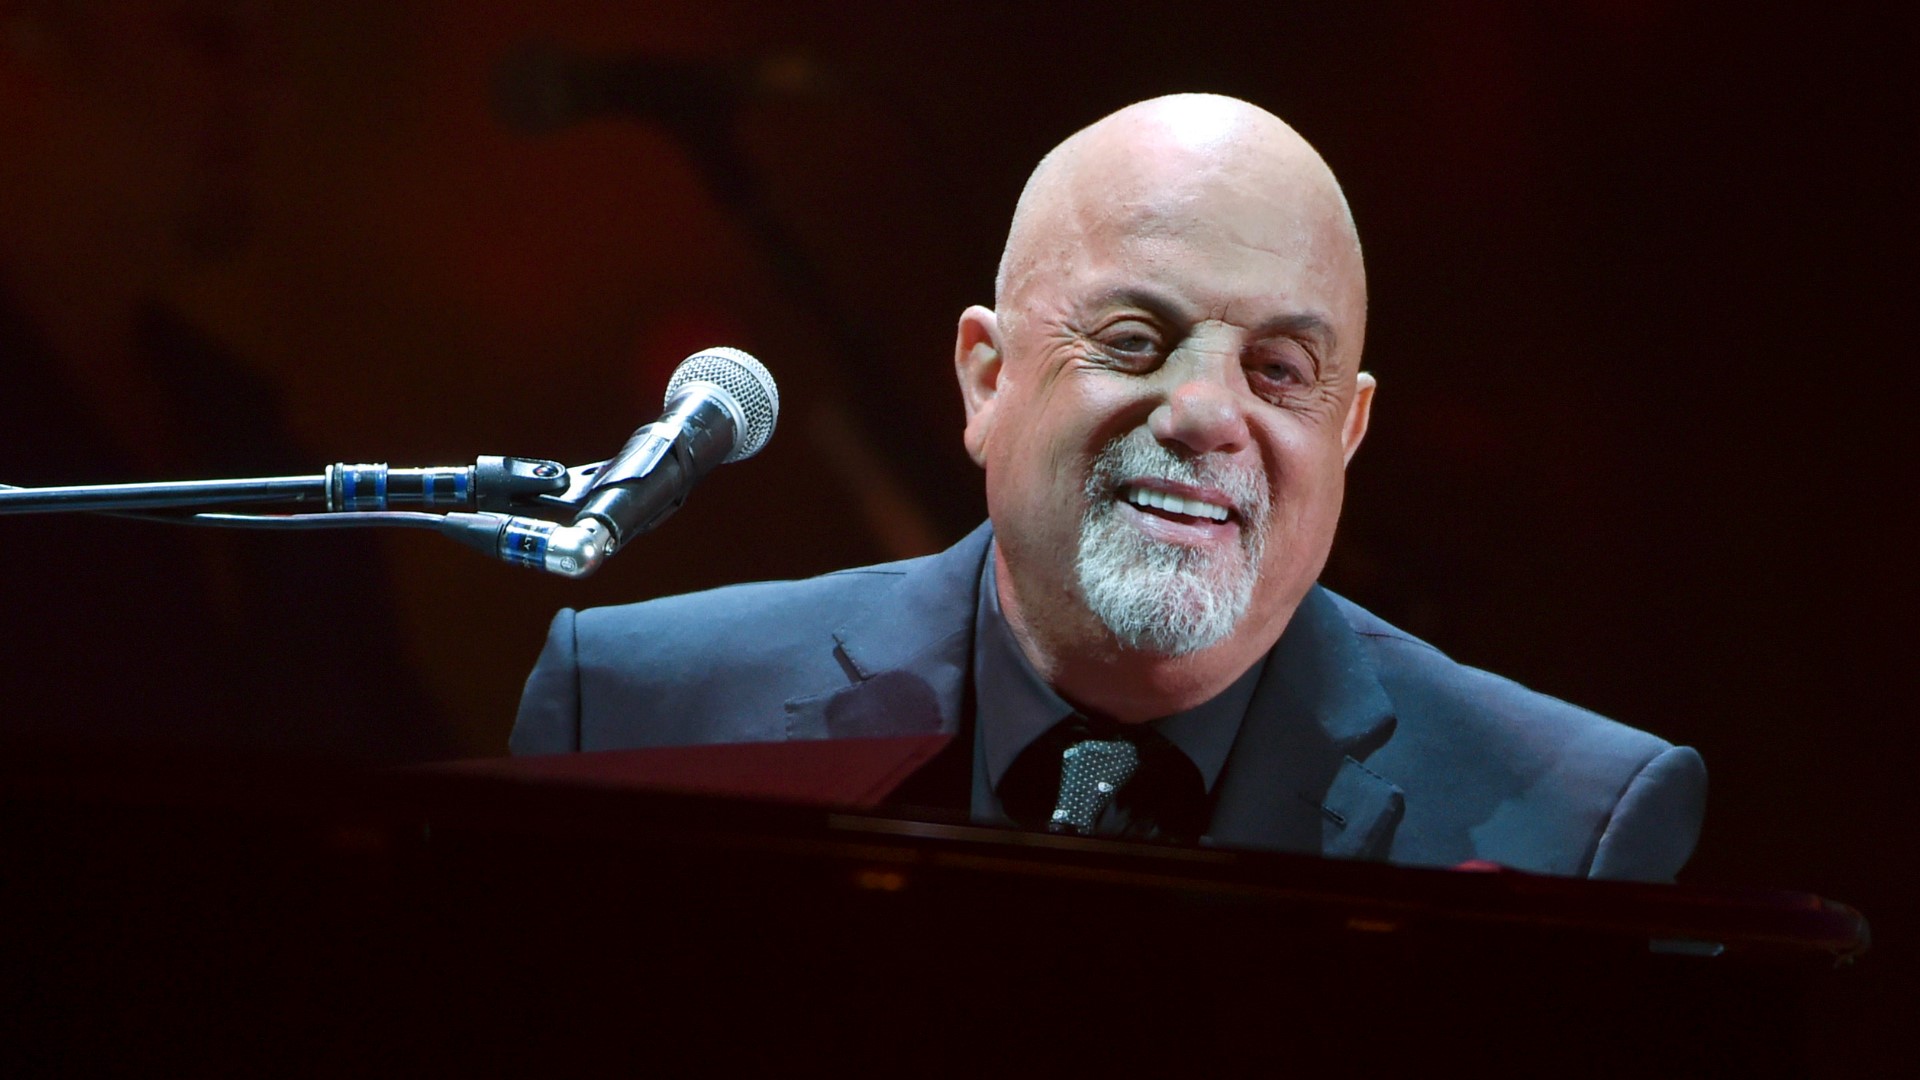 Billy Joel will play a concert at Bank of America stadium in April of 2020, the Panthers and Live Nation announced Tuesday.